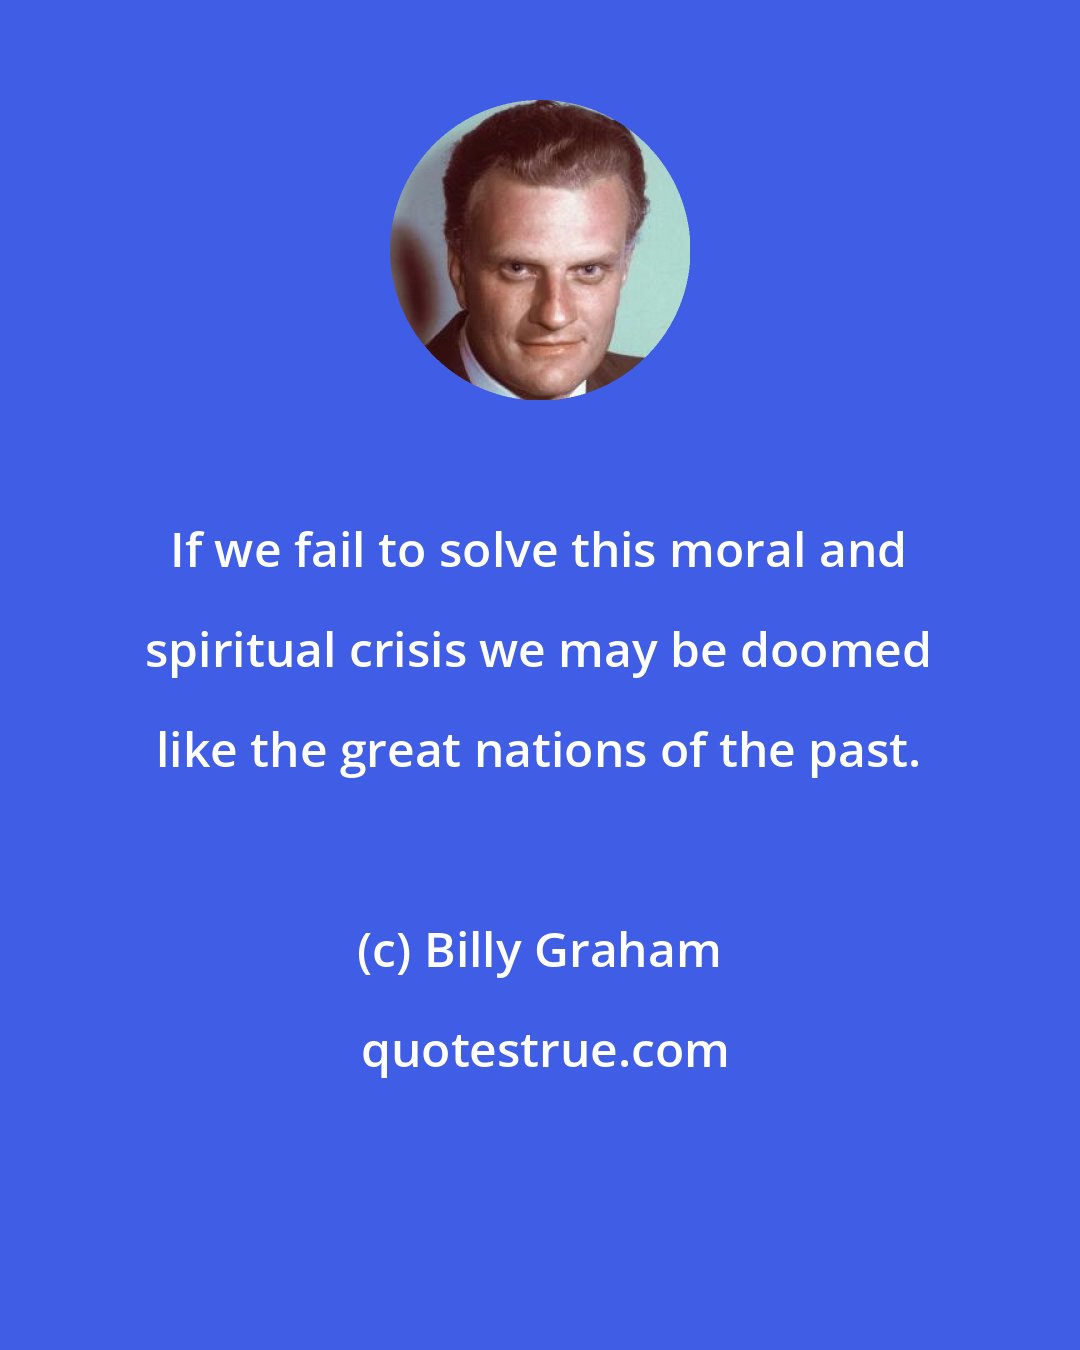 Billy Graham: If we fail to solve this moral and spiritual crisis we may be doomed like the great nations of the past.